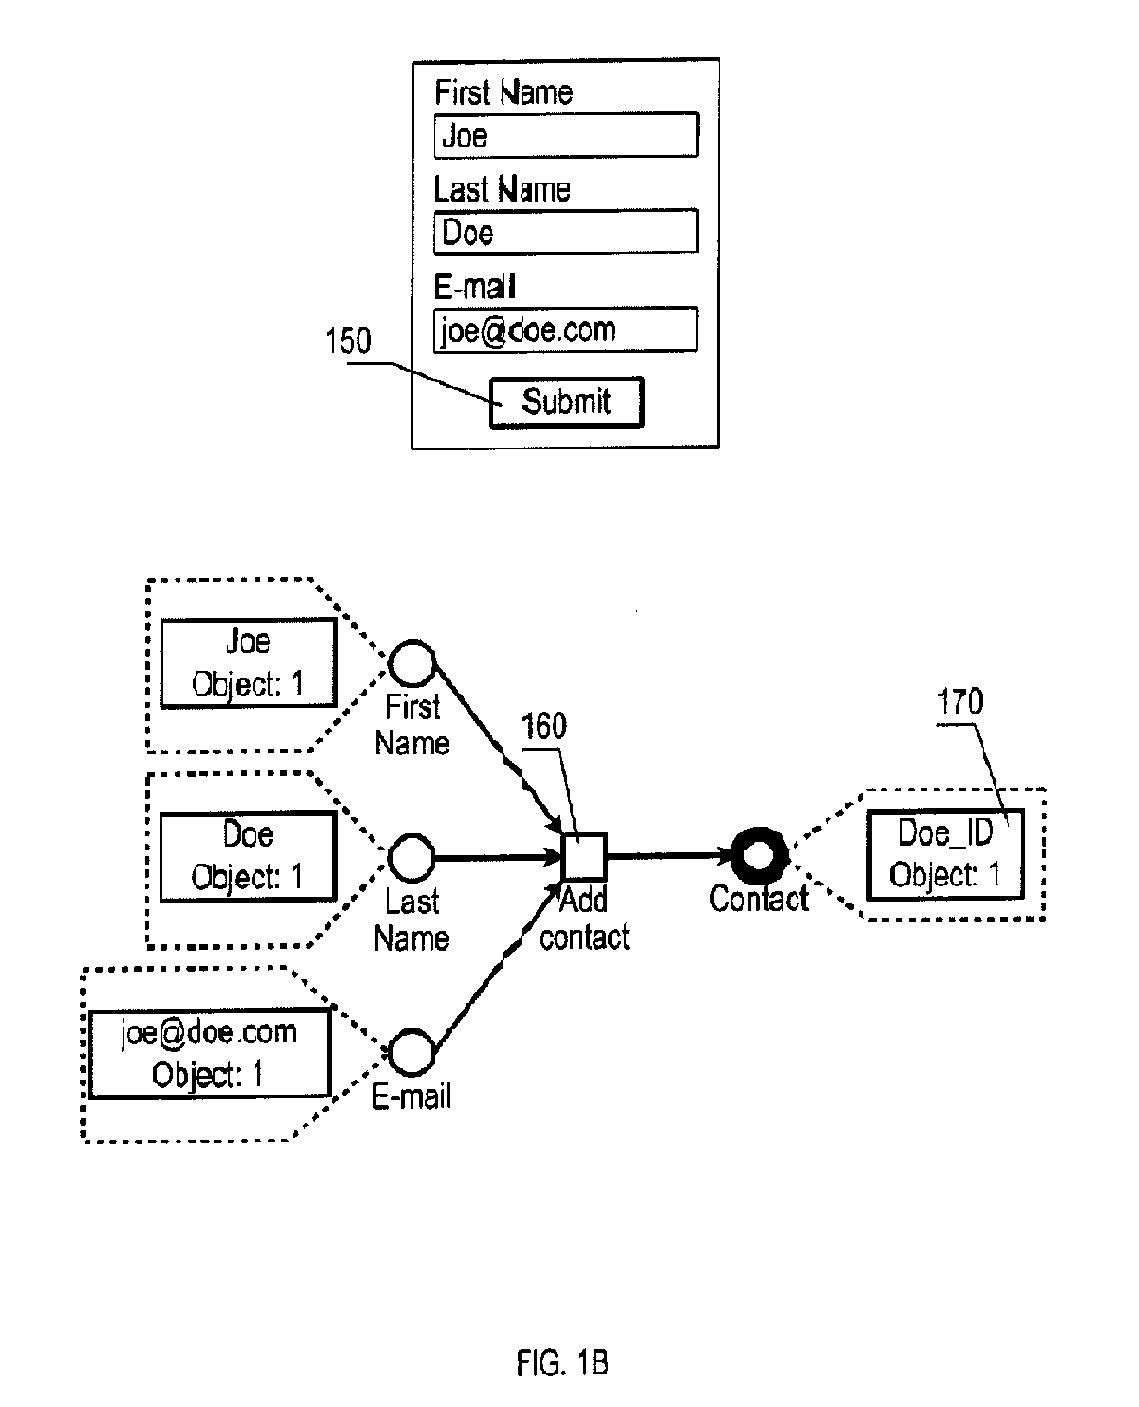 System and method for specifying and implementing IT systems